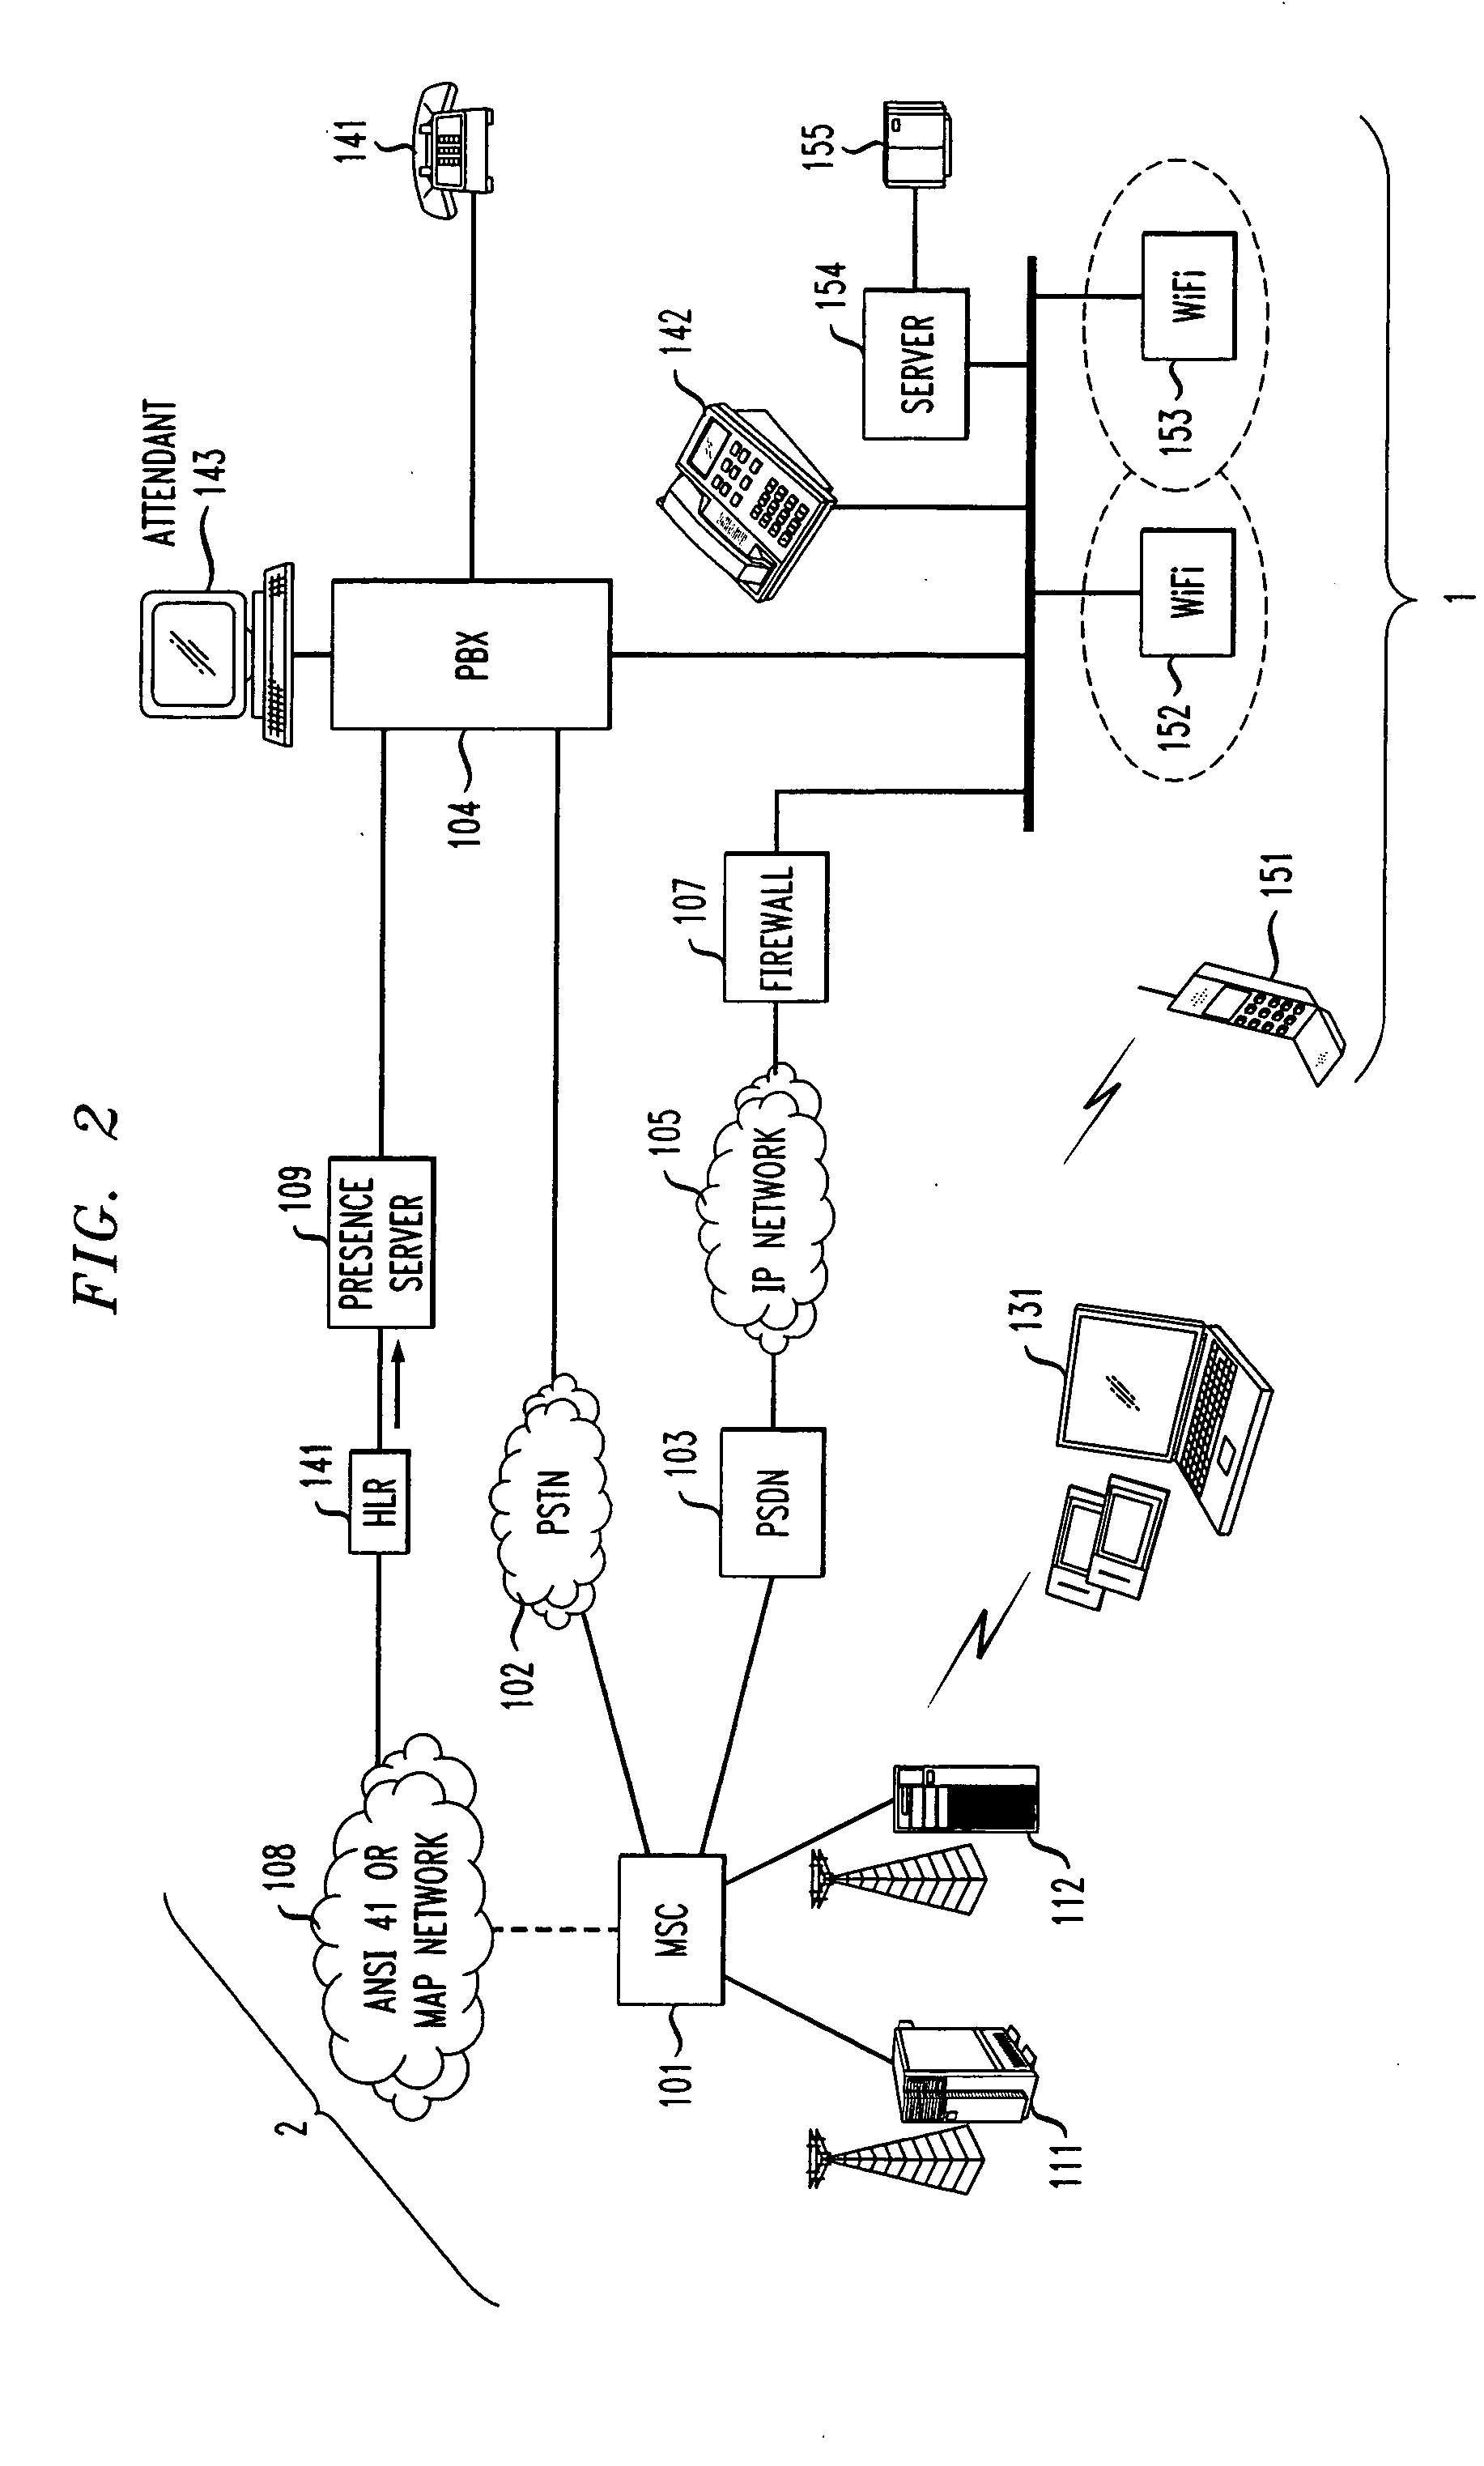 System for providing interoperability of a proprietary enterprise communication network with a cellular communication network